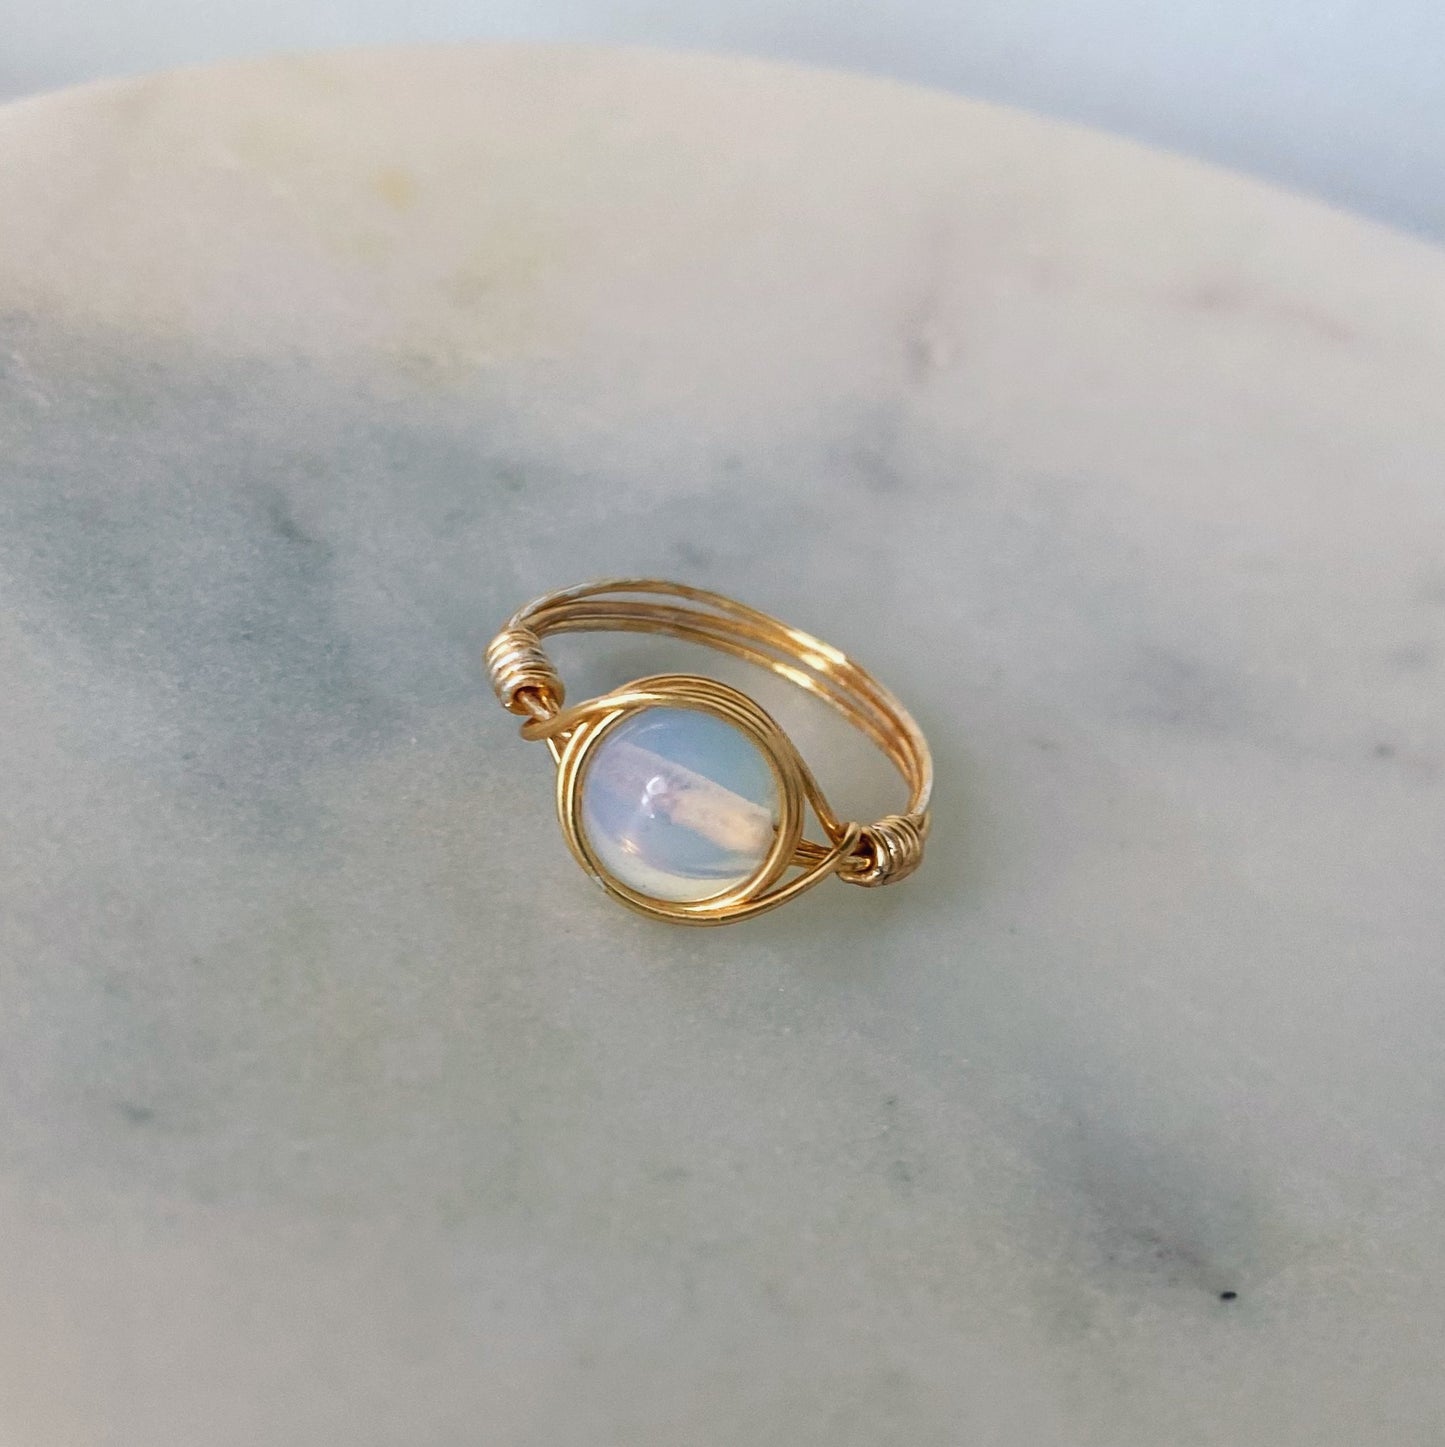 Opal moonstone wire wrapped ring